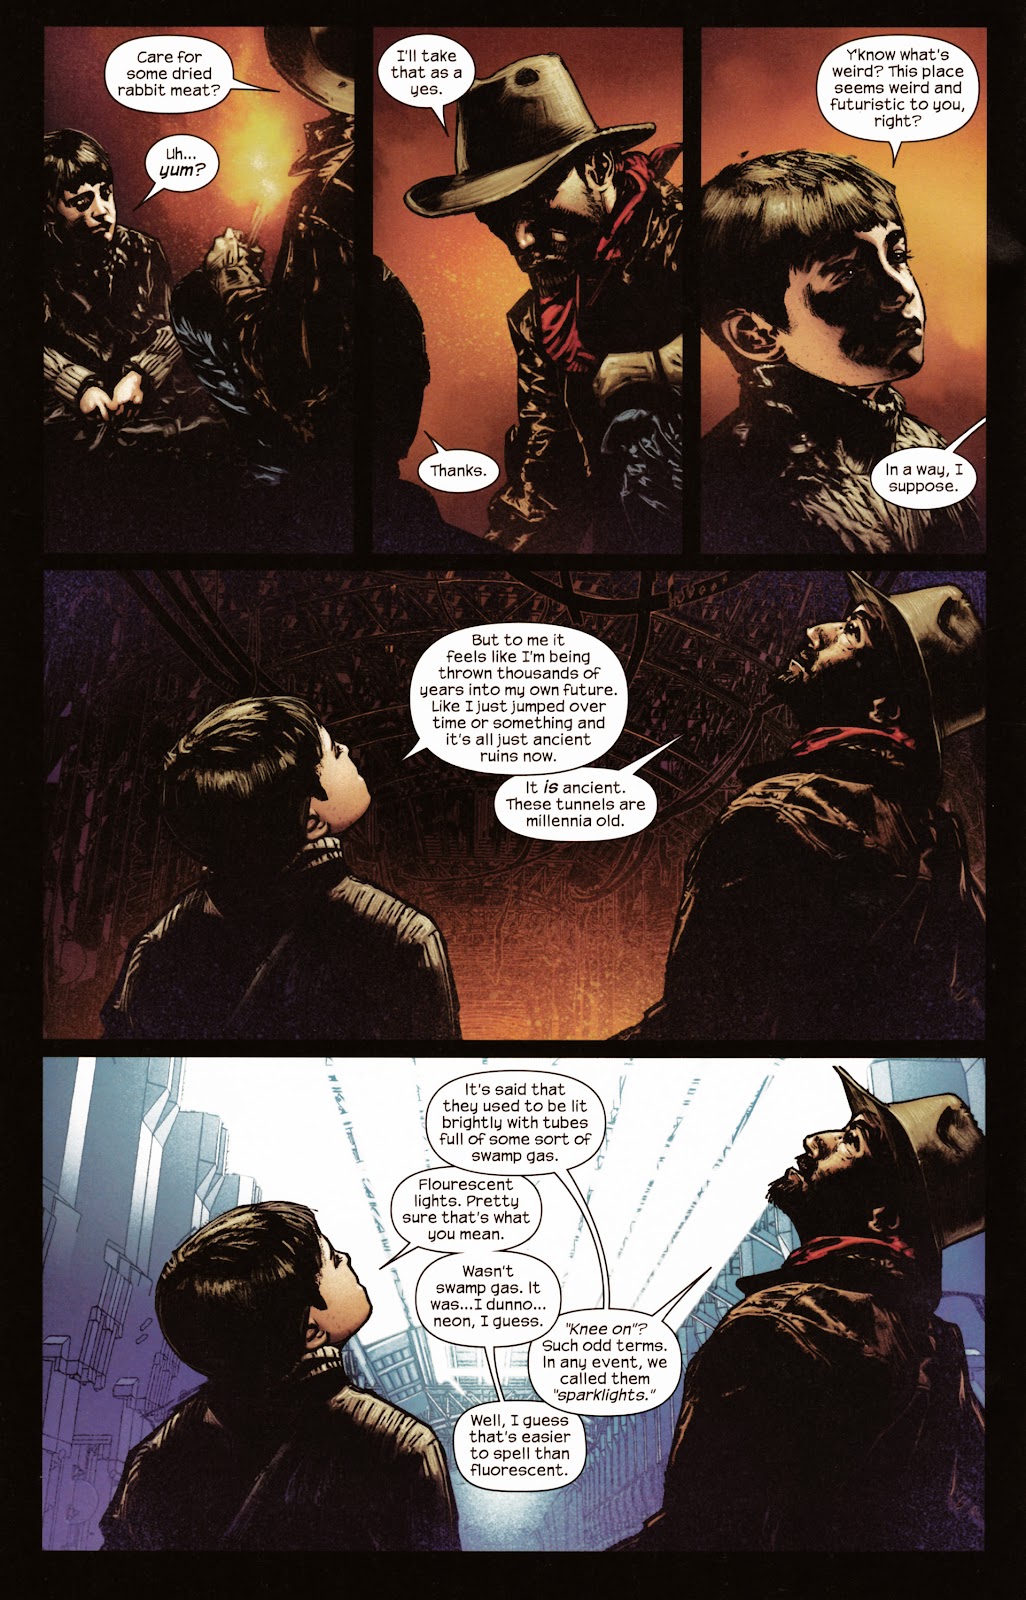 Dark Tower: The Gunslinger - The Man in Black issue 2 - Page 9